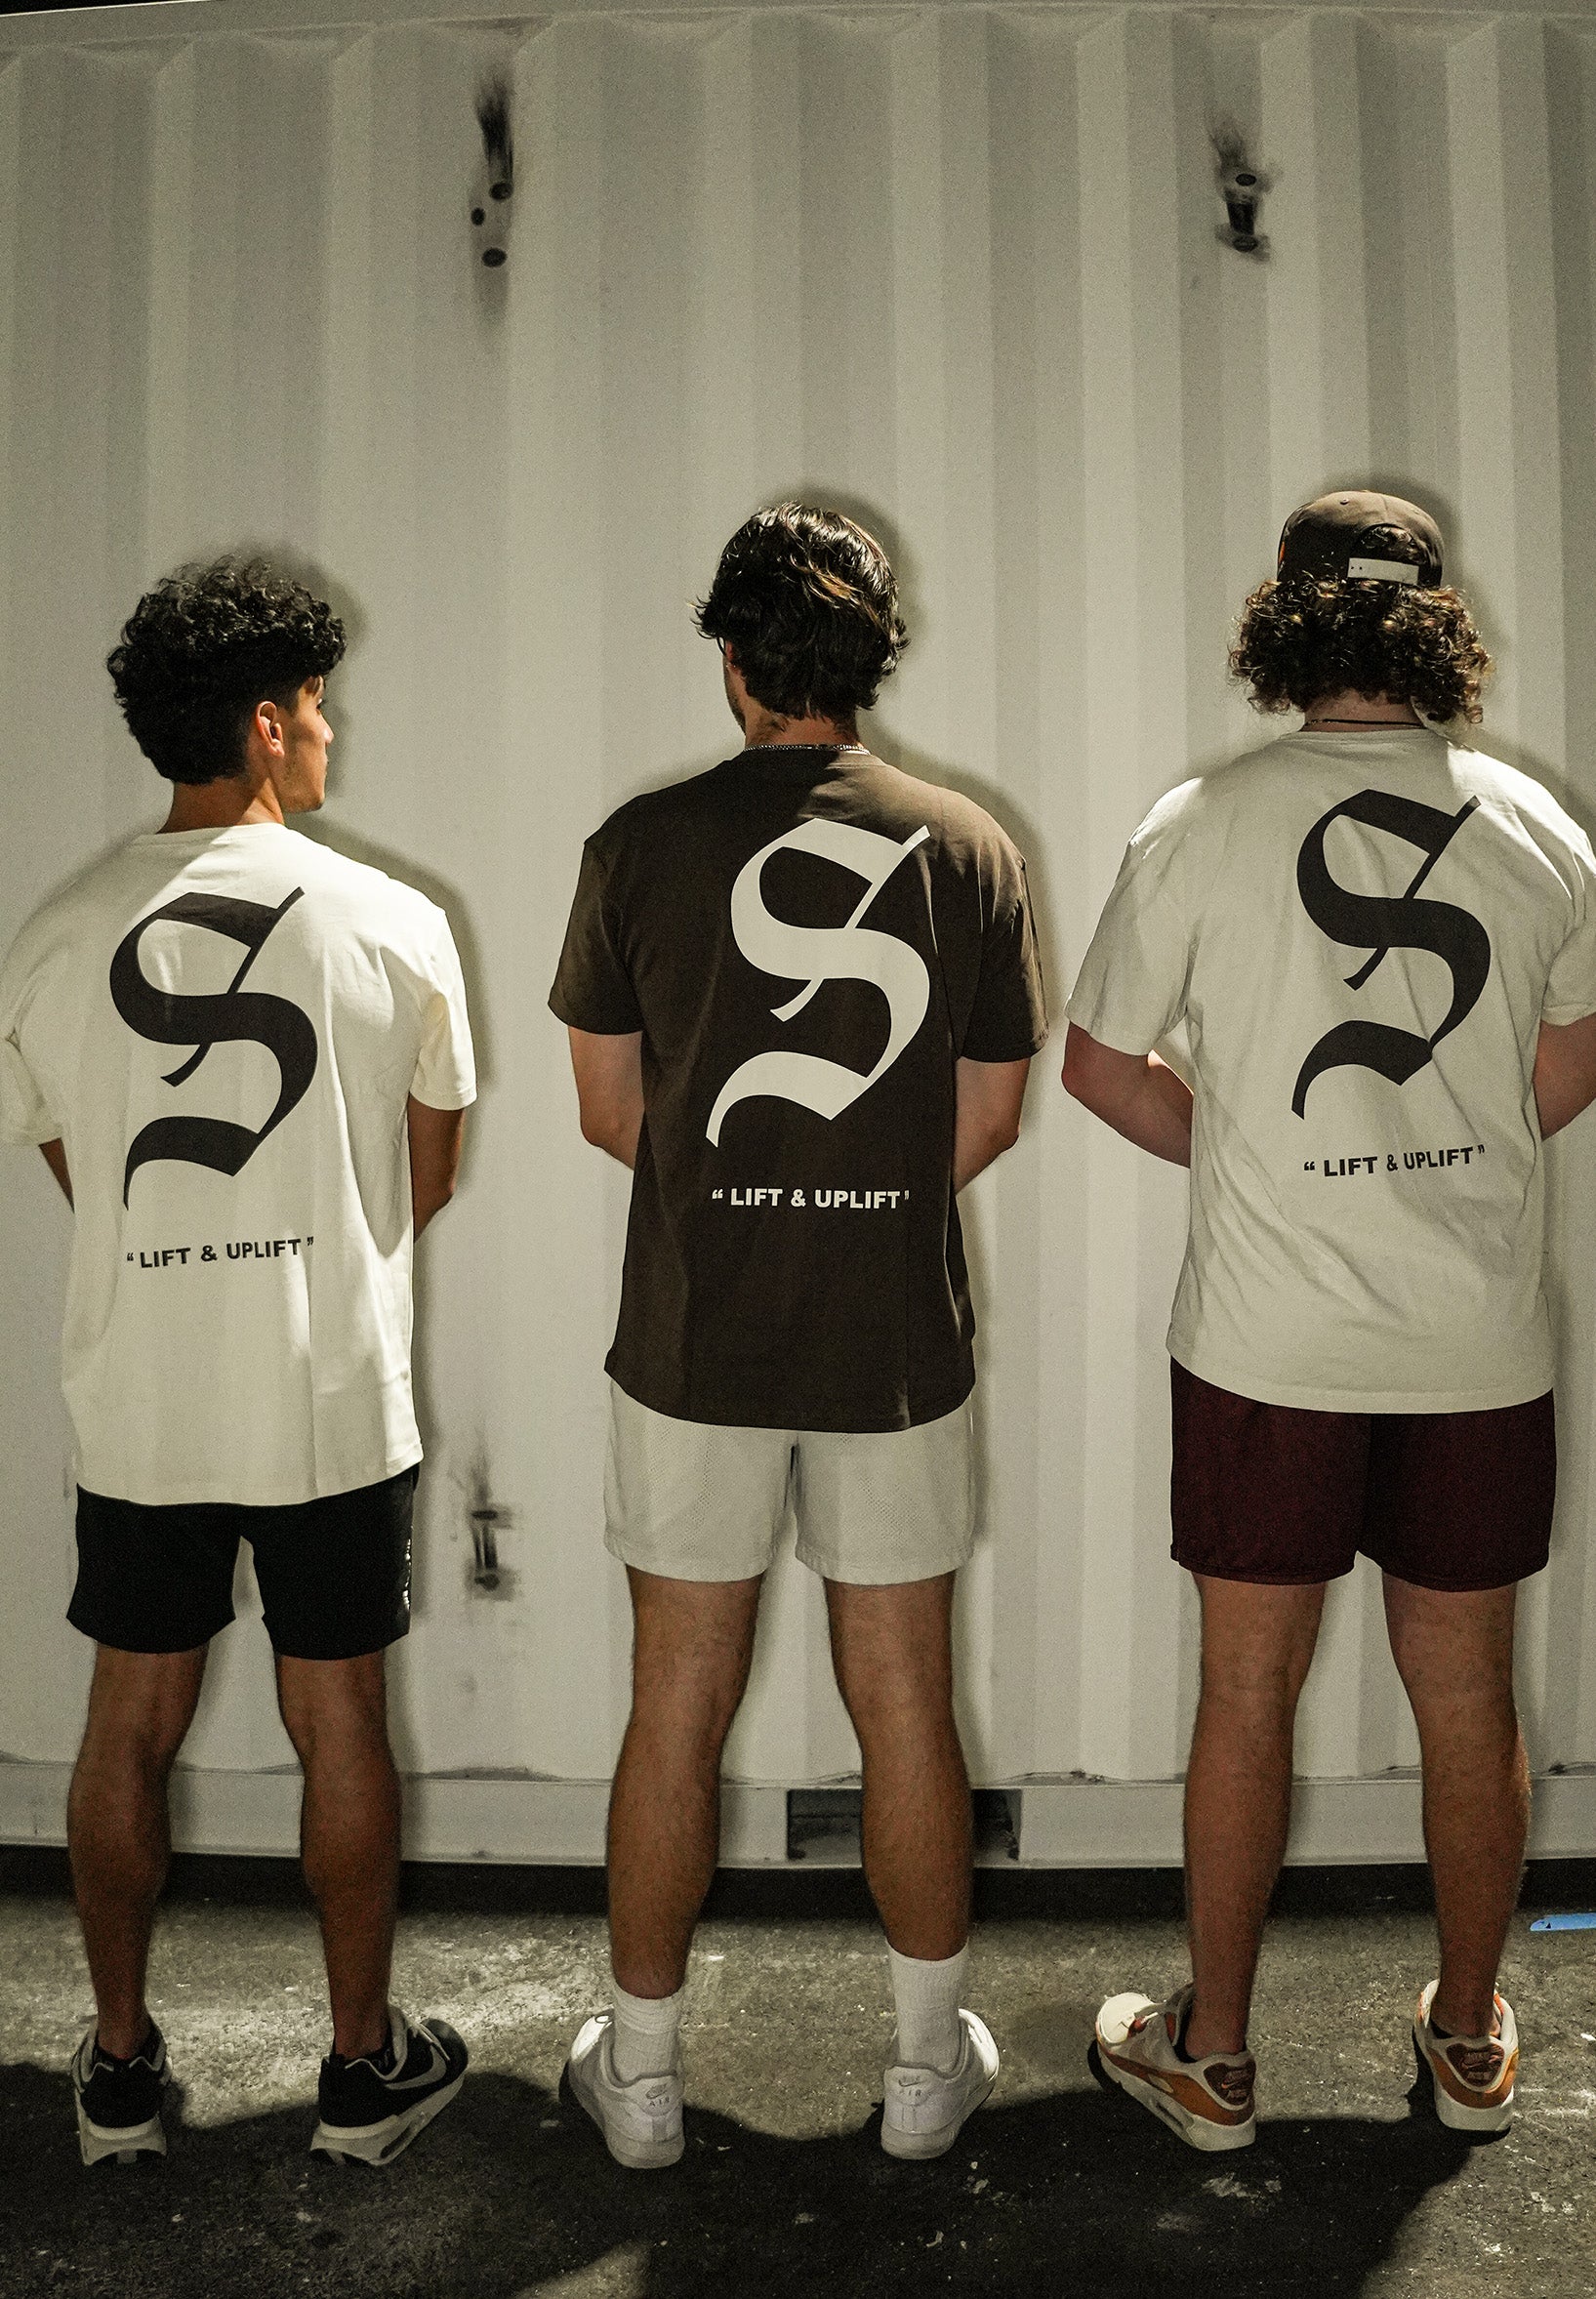 – LIFTING SOCIETY THE BLACKLETTER TEE